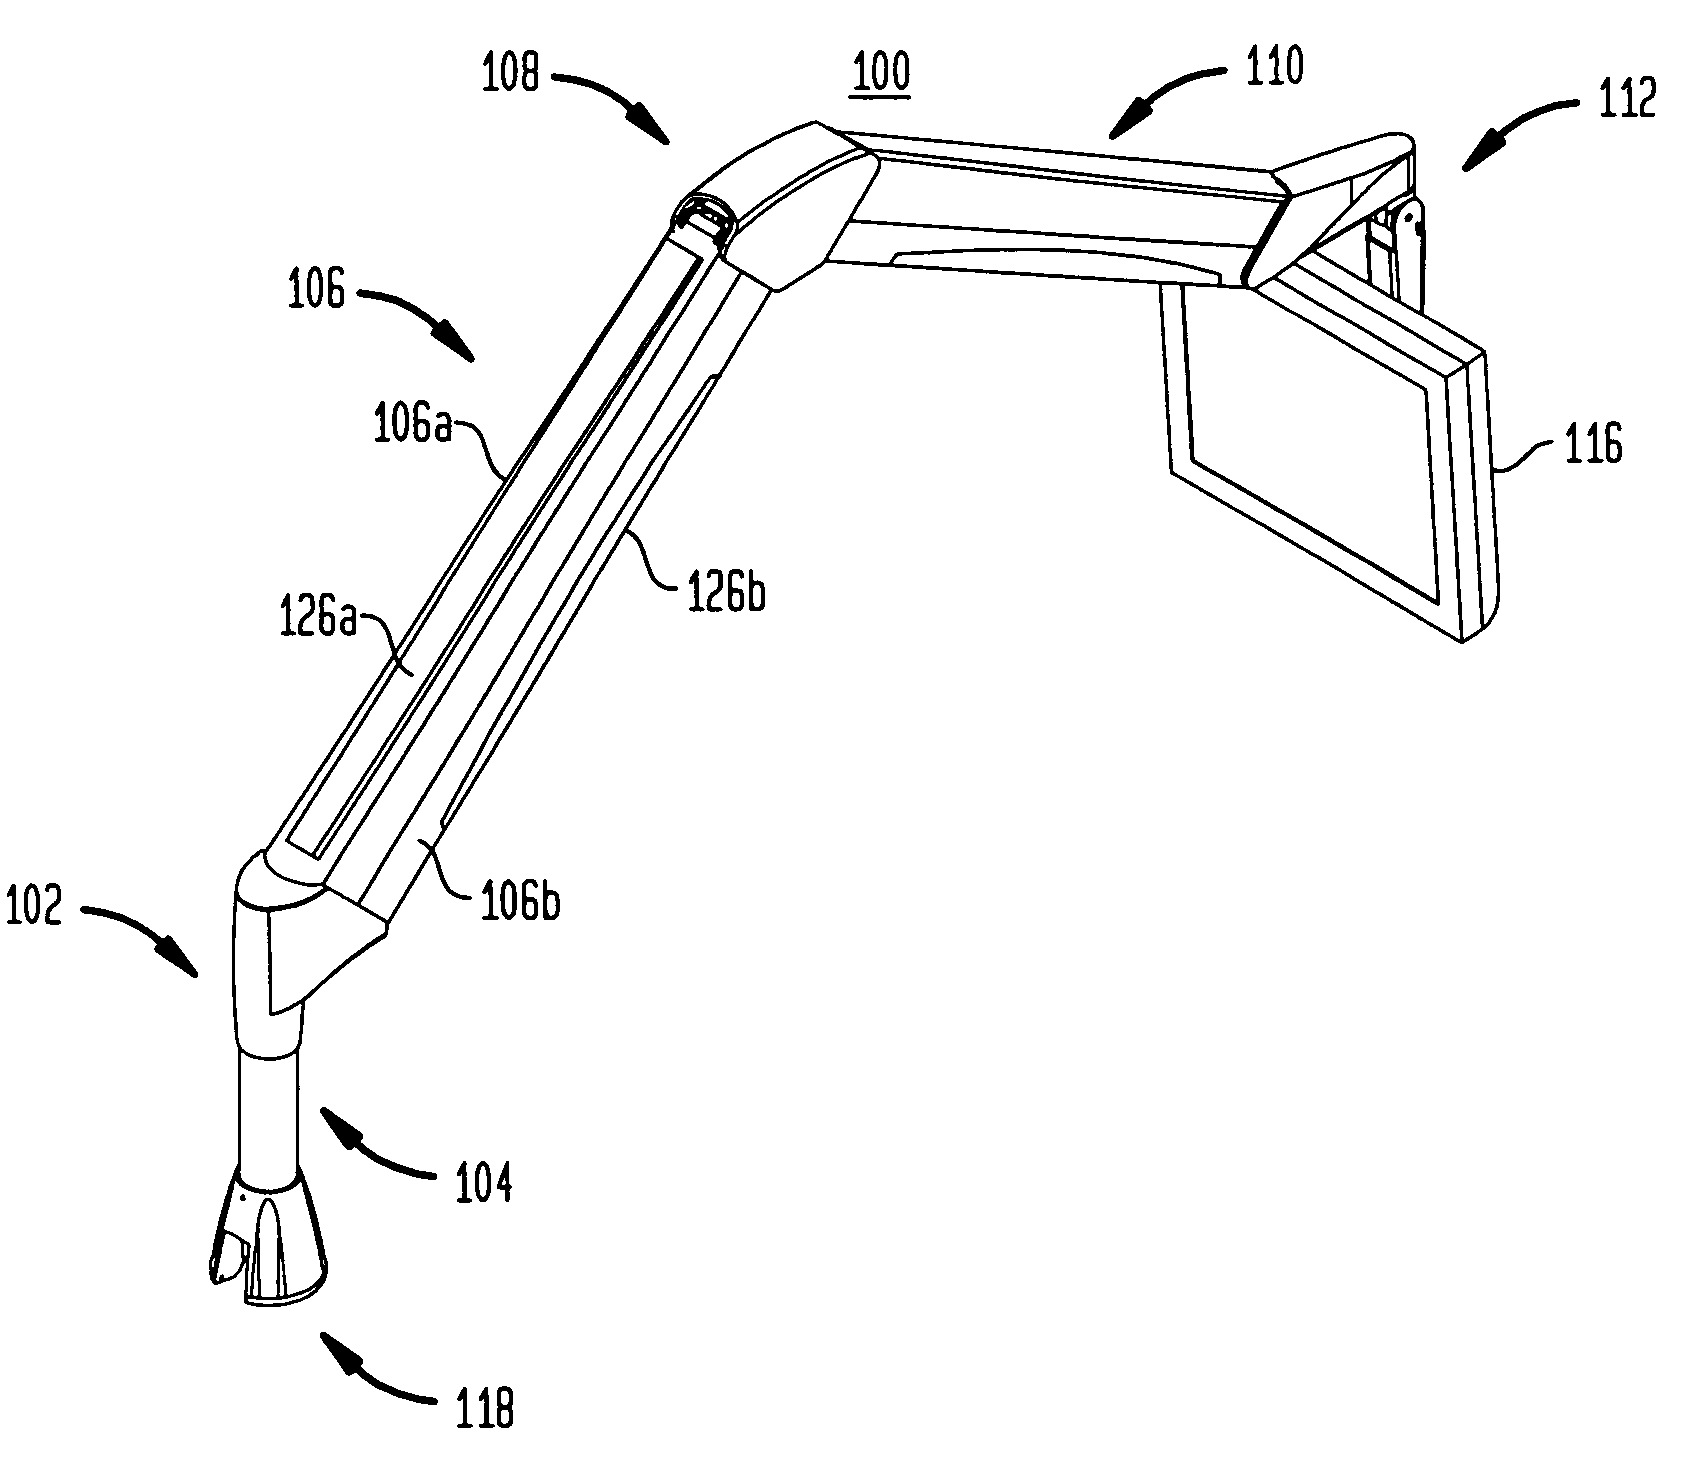 Extension arm with moving clevis